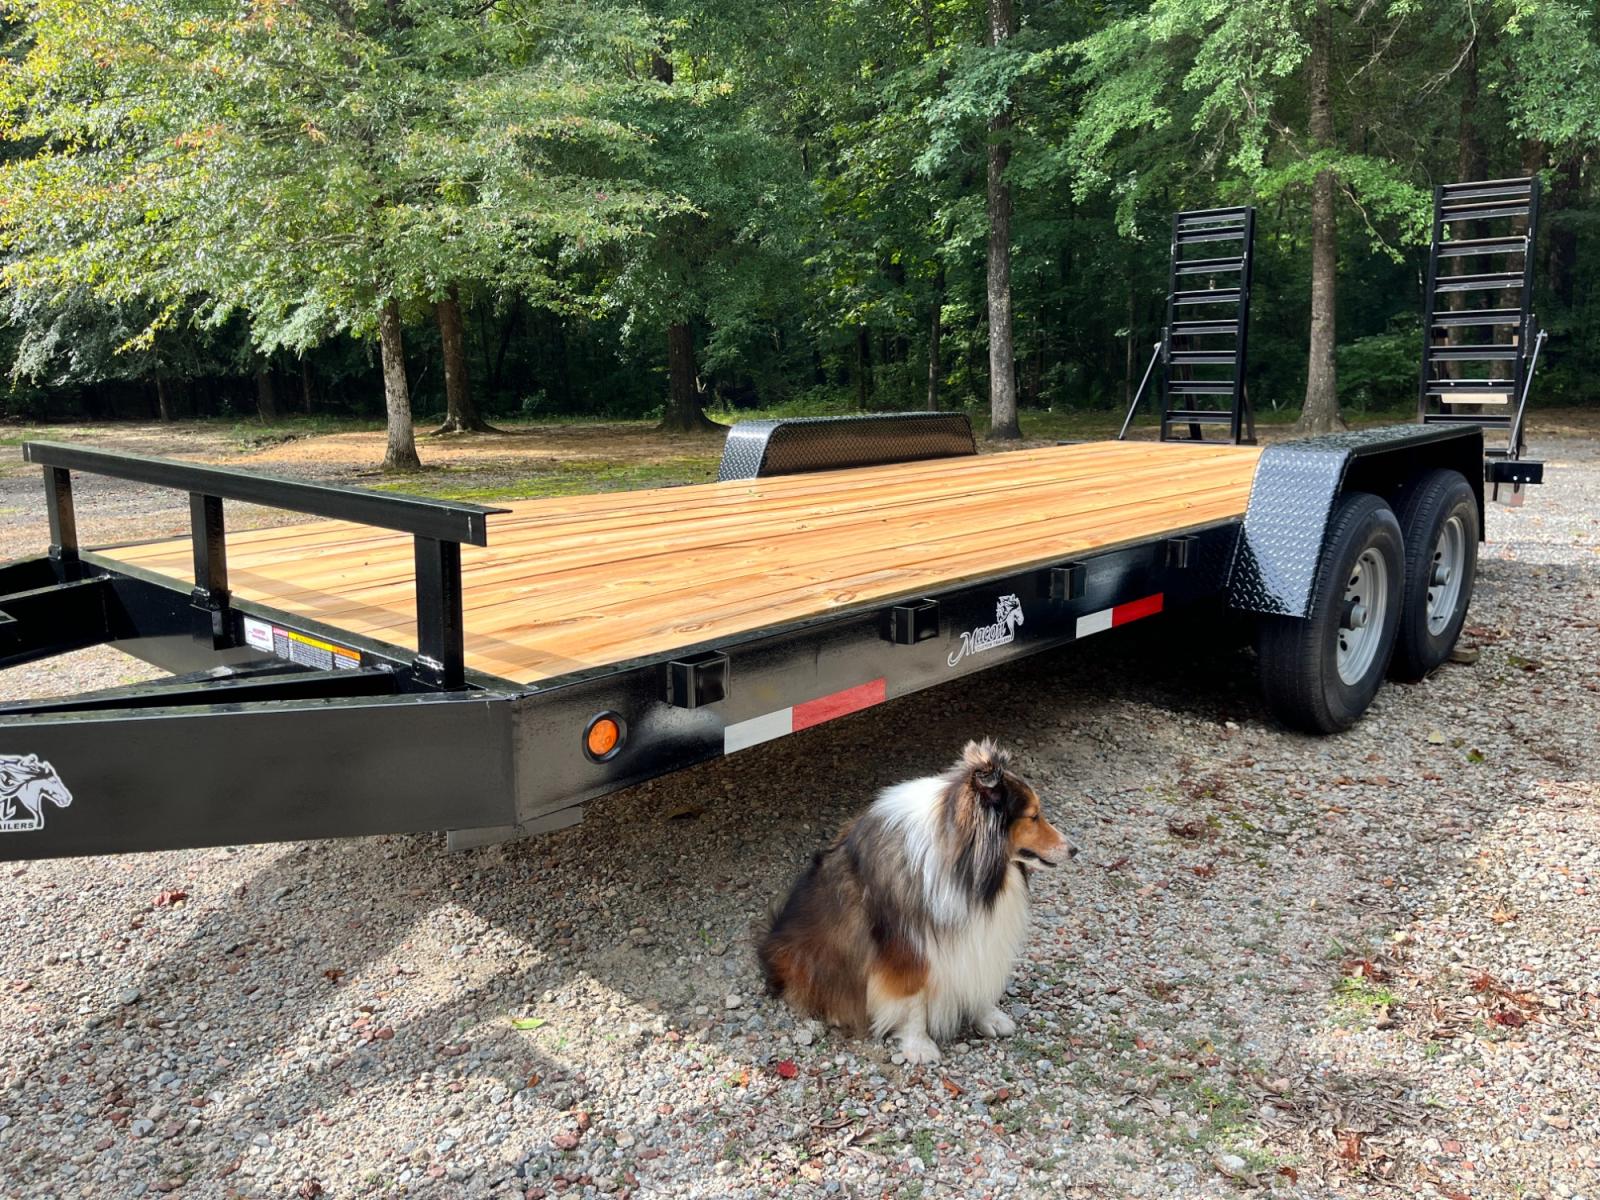 2022 Macon Custom Trailers 7ft X 20ft Flatbed 7 Ton , located at 1330 Rainey Rd., Macon, 31220, (478) 960-1044, 32.845638, -83.778687 - Brand New 2022 Model "Top of the Line" Flatbed BobCat & Equipment Trailer! 7ft X 20ft Including the 24" Beavertail 7k lb Brake Axles! Haul Your Truck, Tractor, BobCat, Mini-Excavator, UTV's, ATV's Etc. Tandem 7,000lb Dexter Axles, Electric Brakes on Both Axles too! 235/80X16" Radials 8" Channel - Photo #9